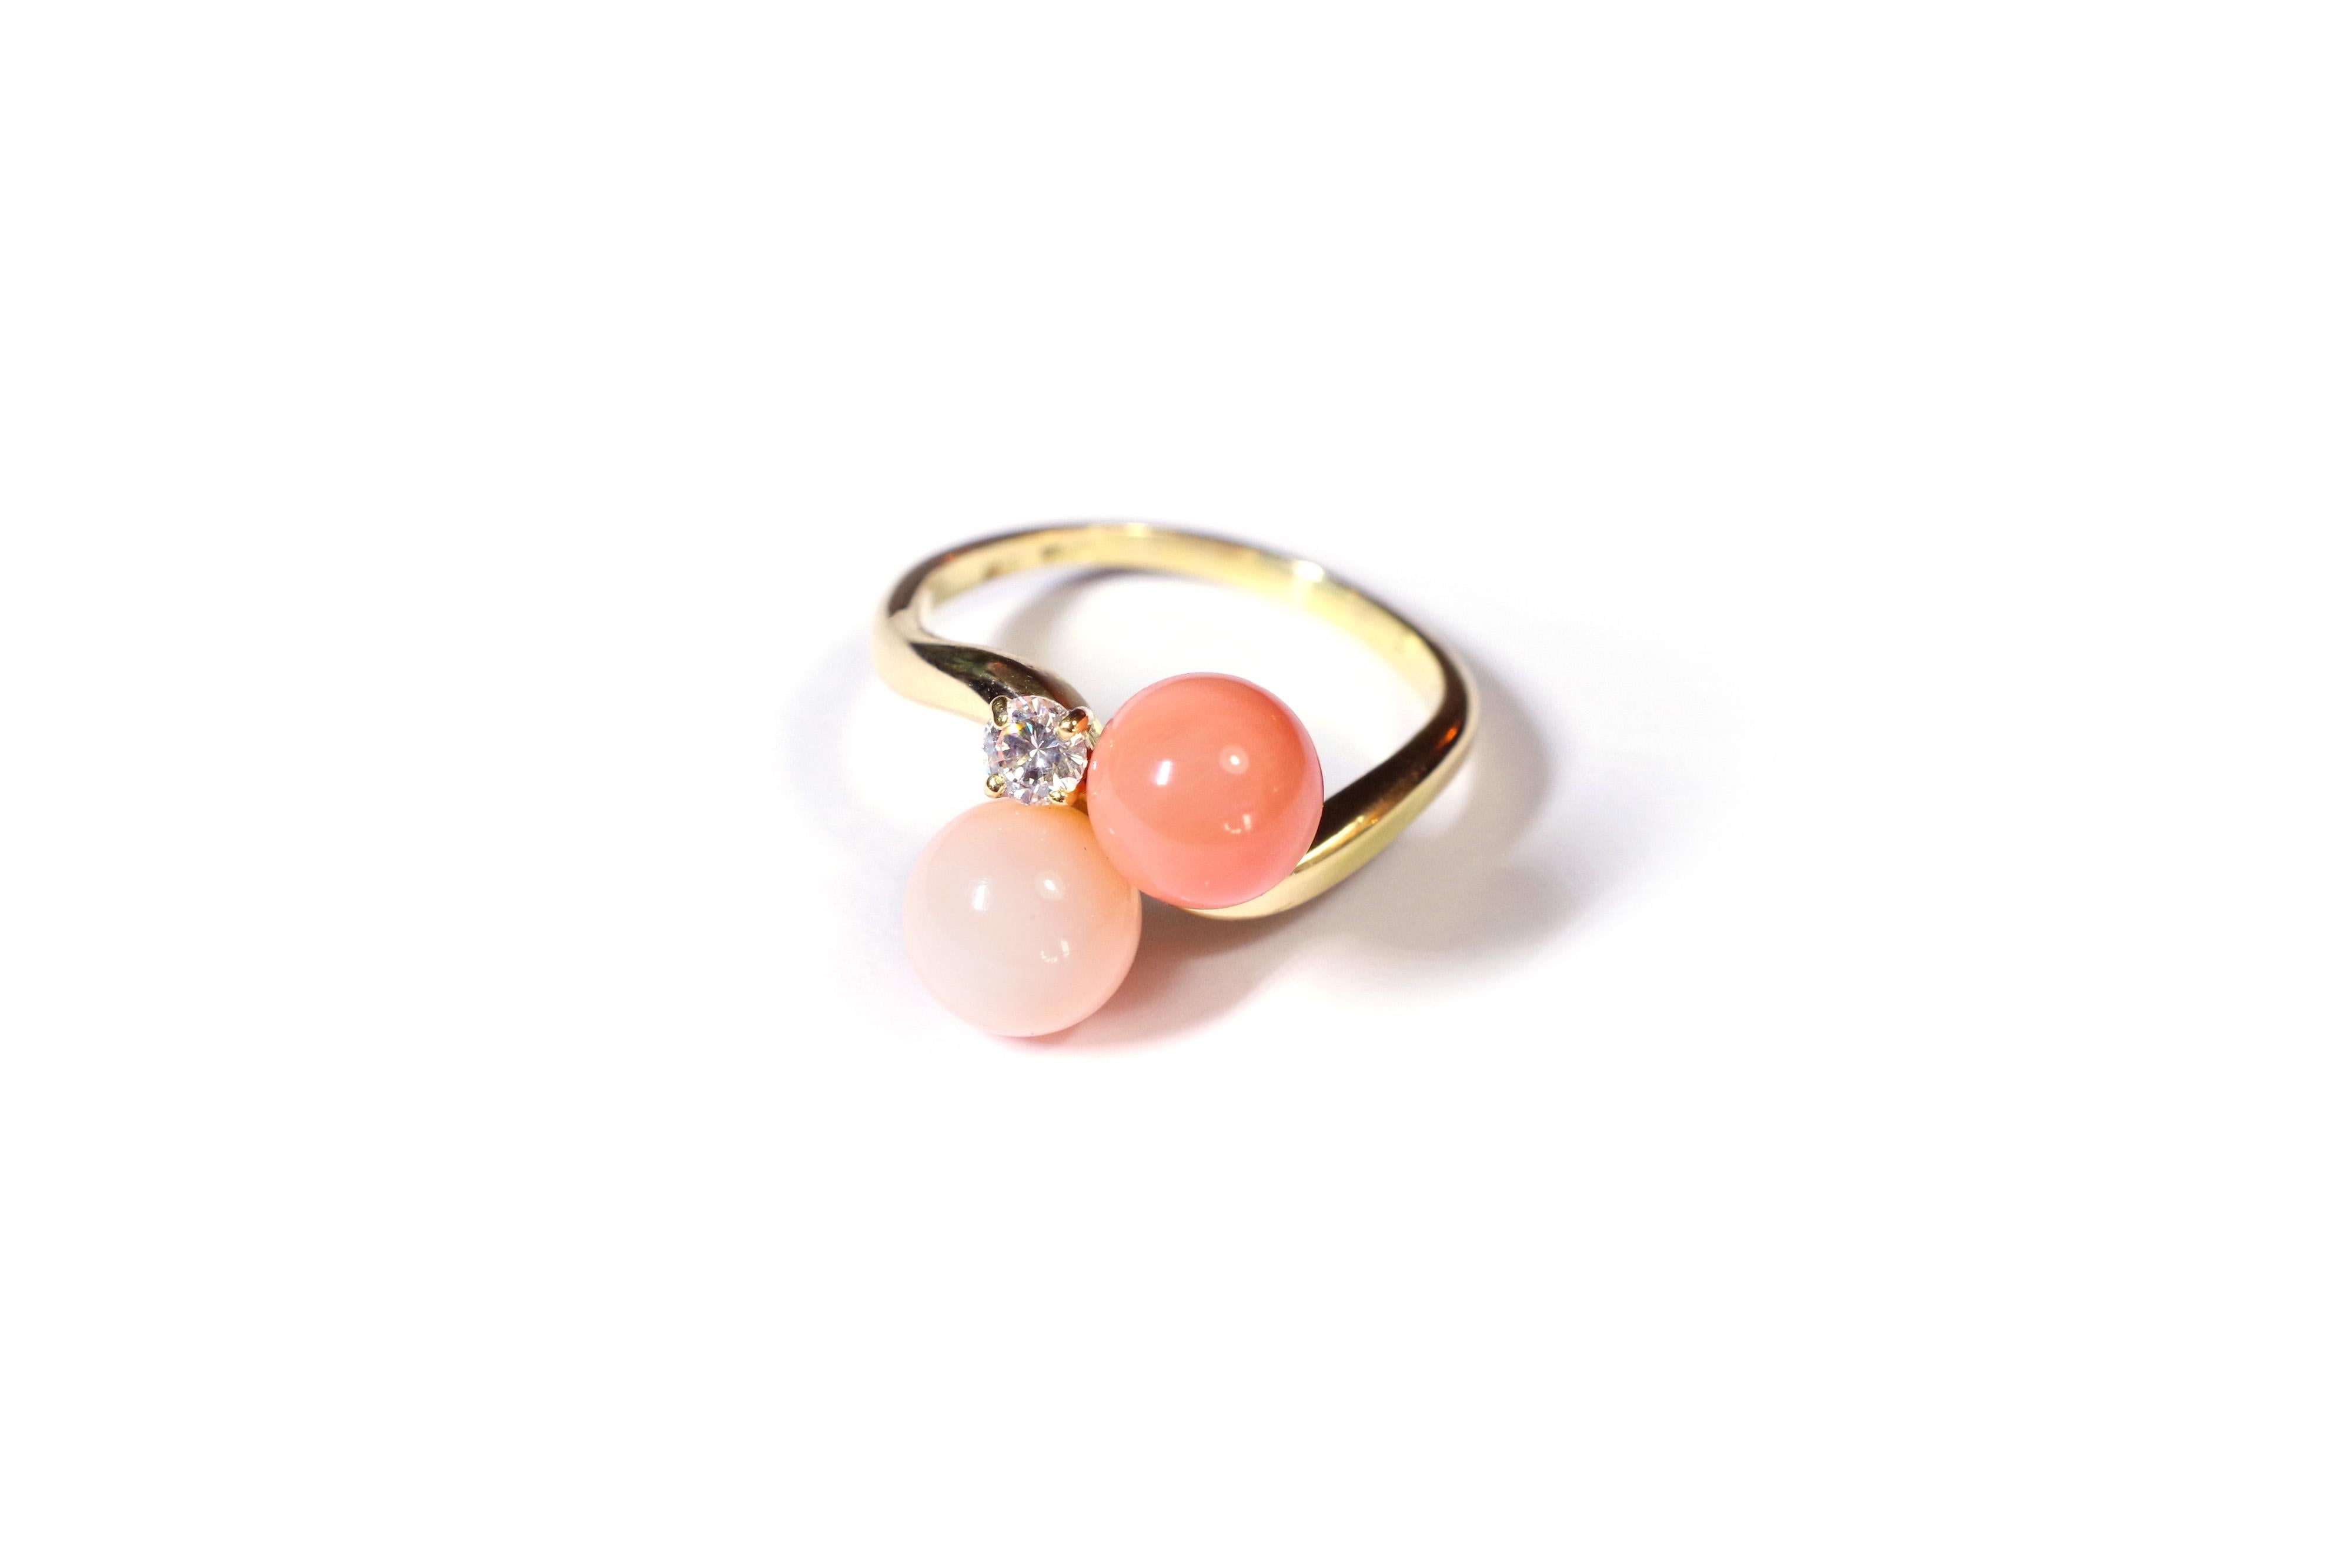 Coral and diamond ring in yellow gold 18 karats. Ring decorated with two coral pearls and a brilliant cut diamond. The first coral pearl has a lovely pale pink color, also called 